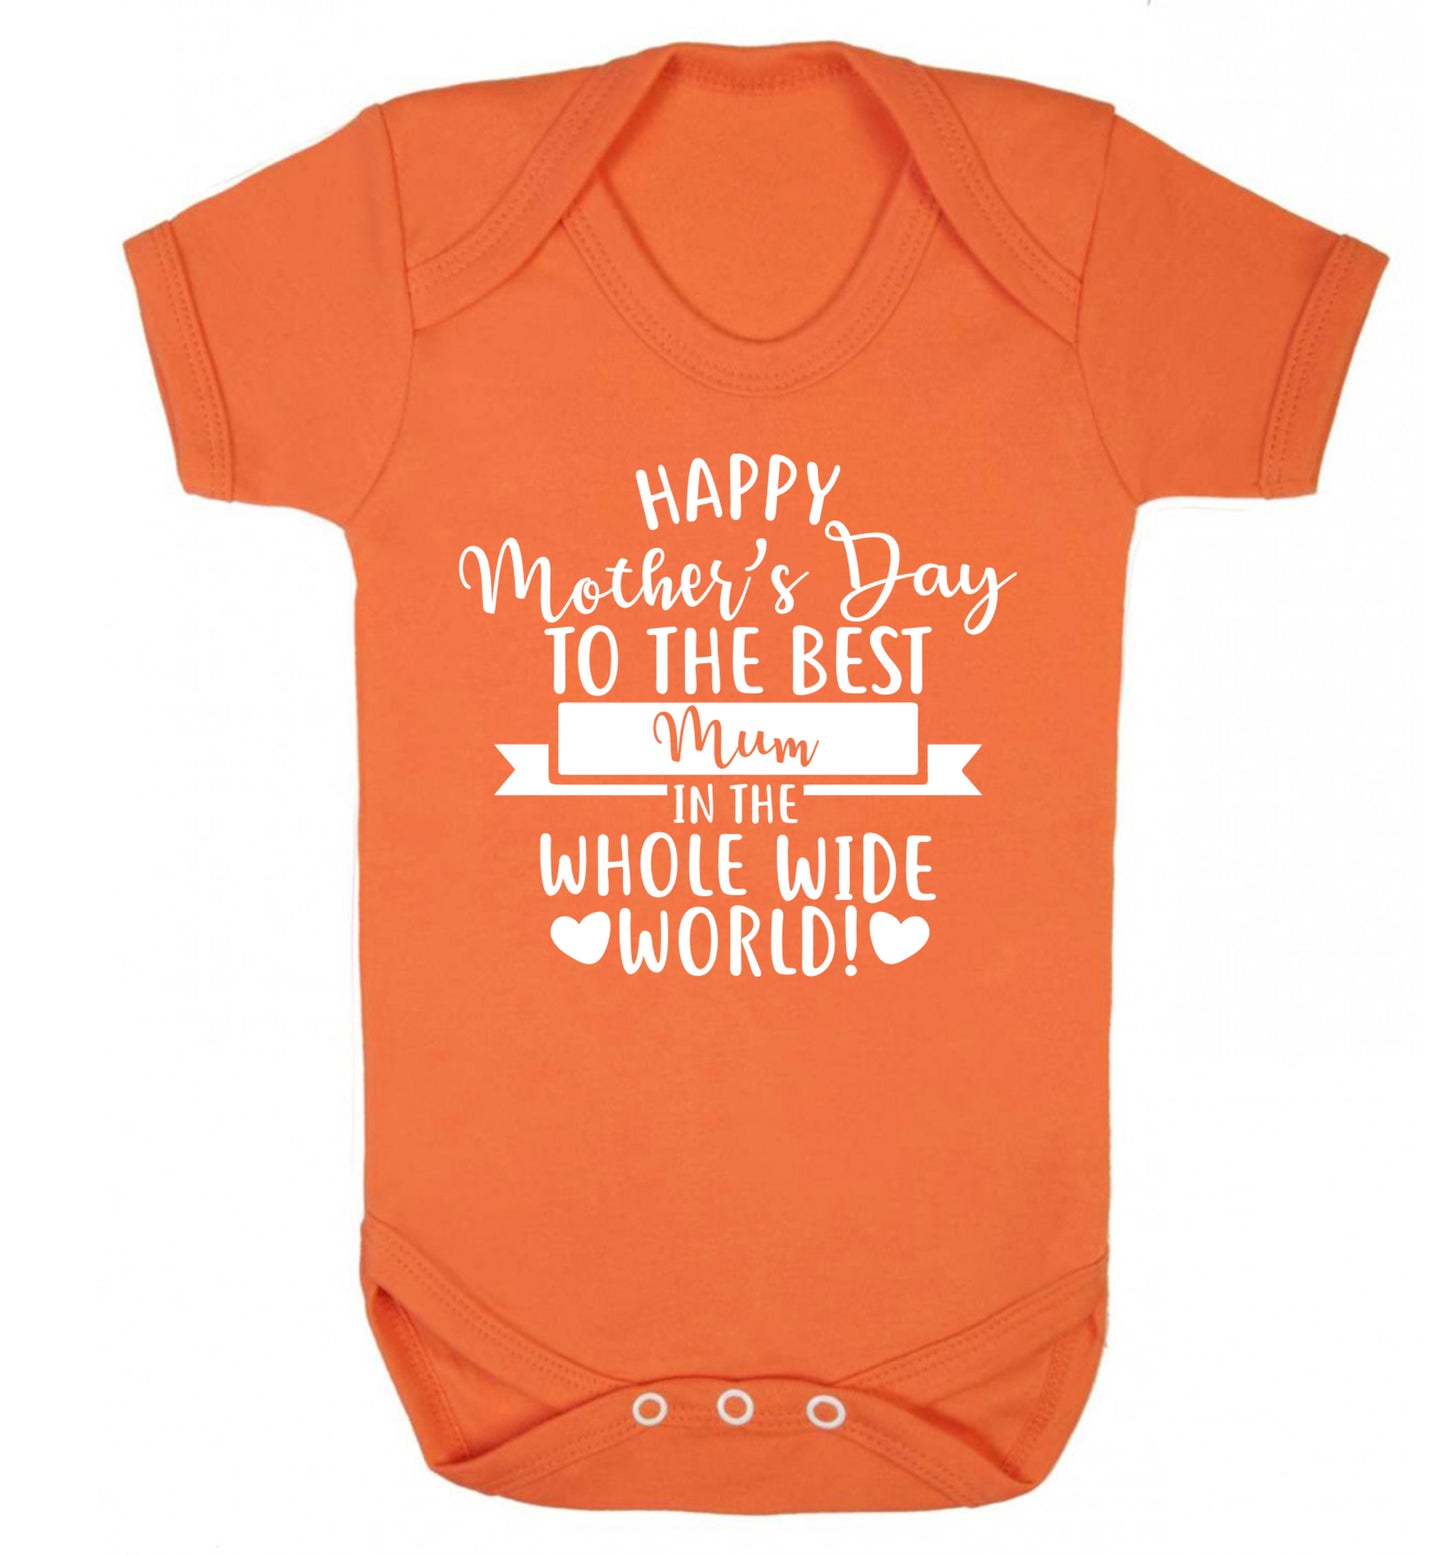 Happy Mother's Day to the best mum in the whole wide world! Baby Vest orange 18-24 months